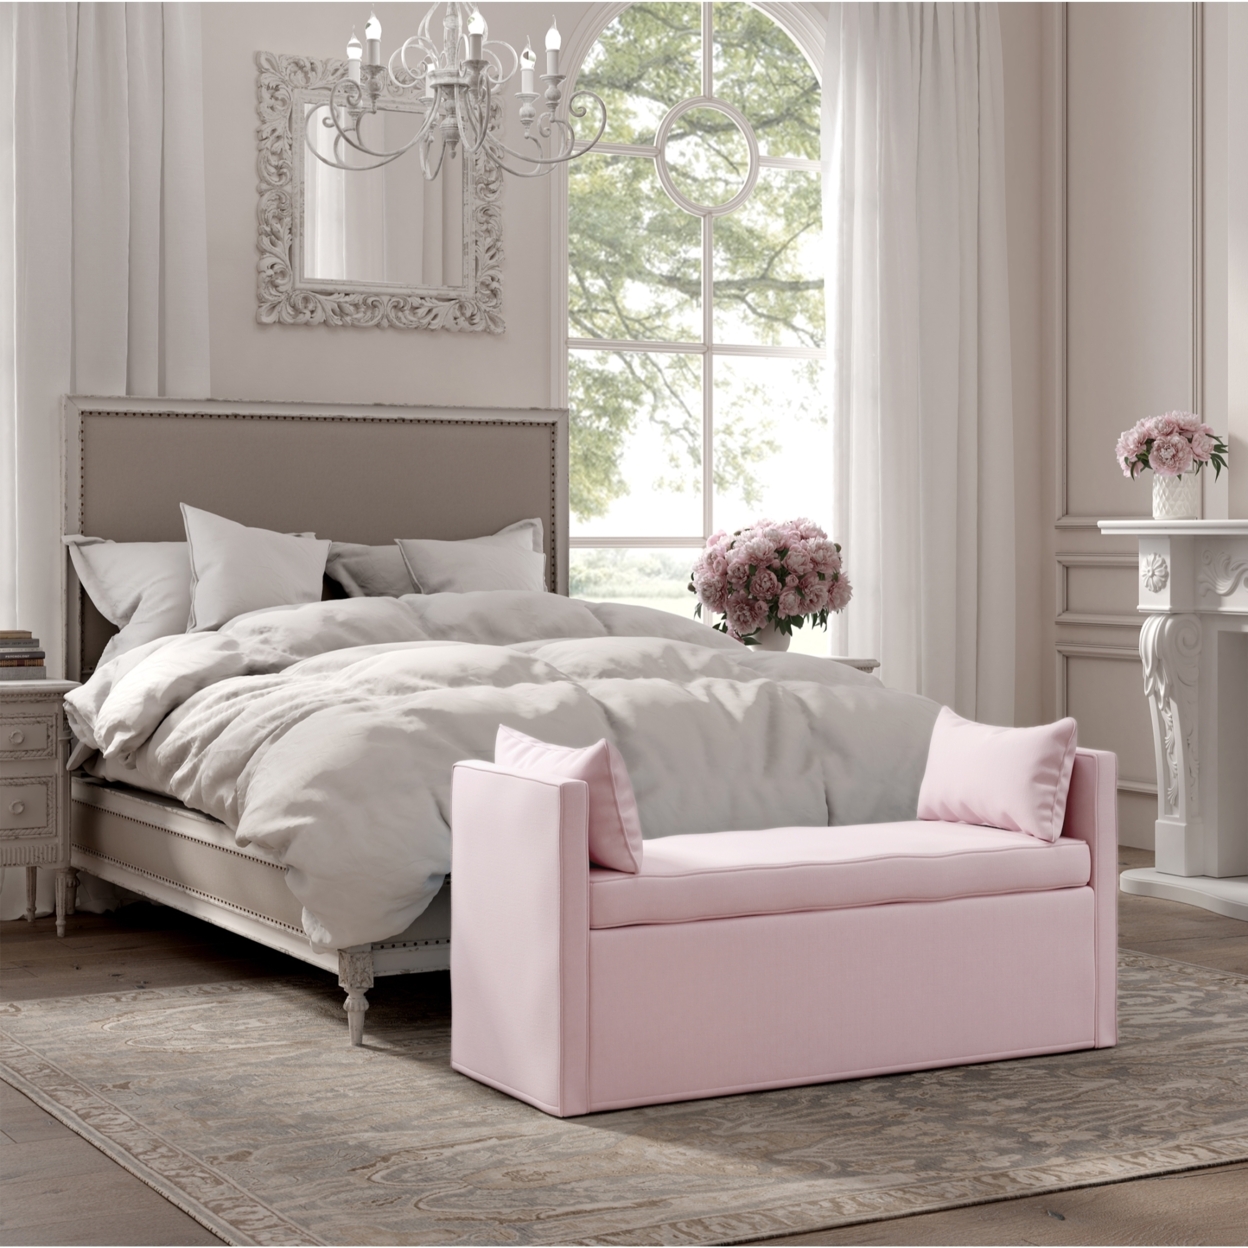 Persephone Bench-Upholstered-Piping Details-Two Pillows - Light Pink